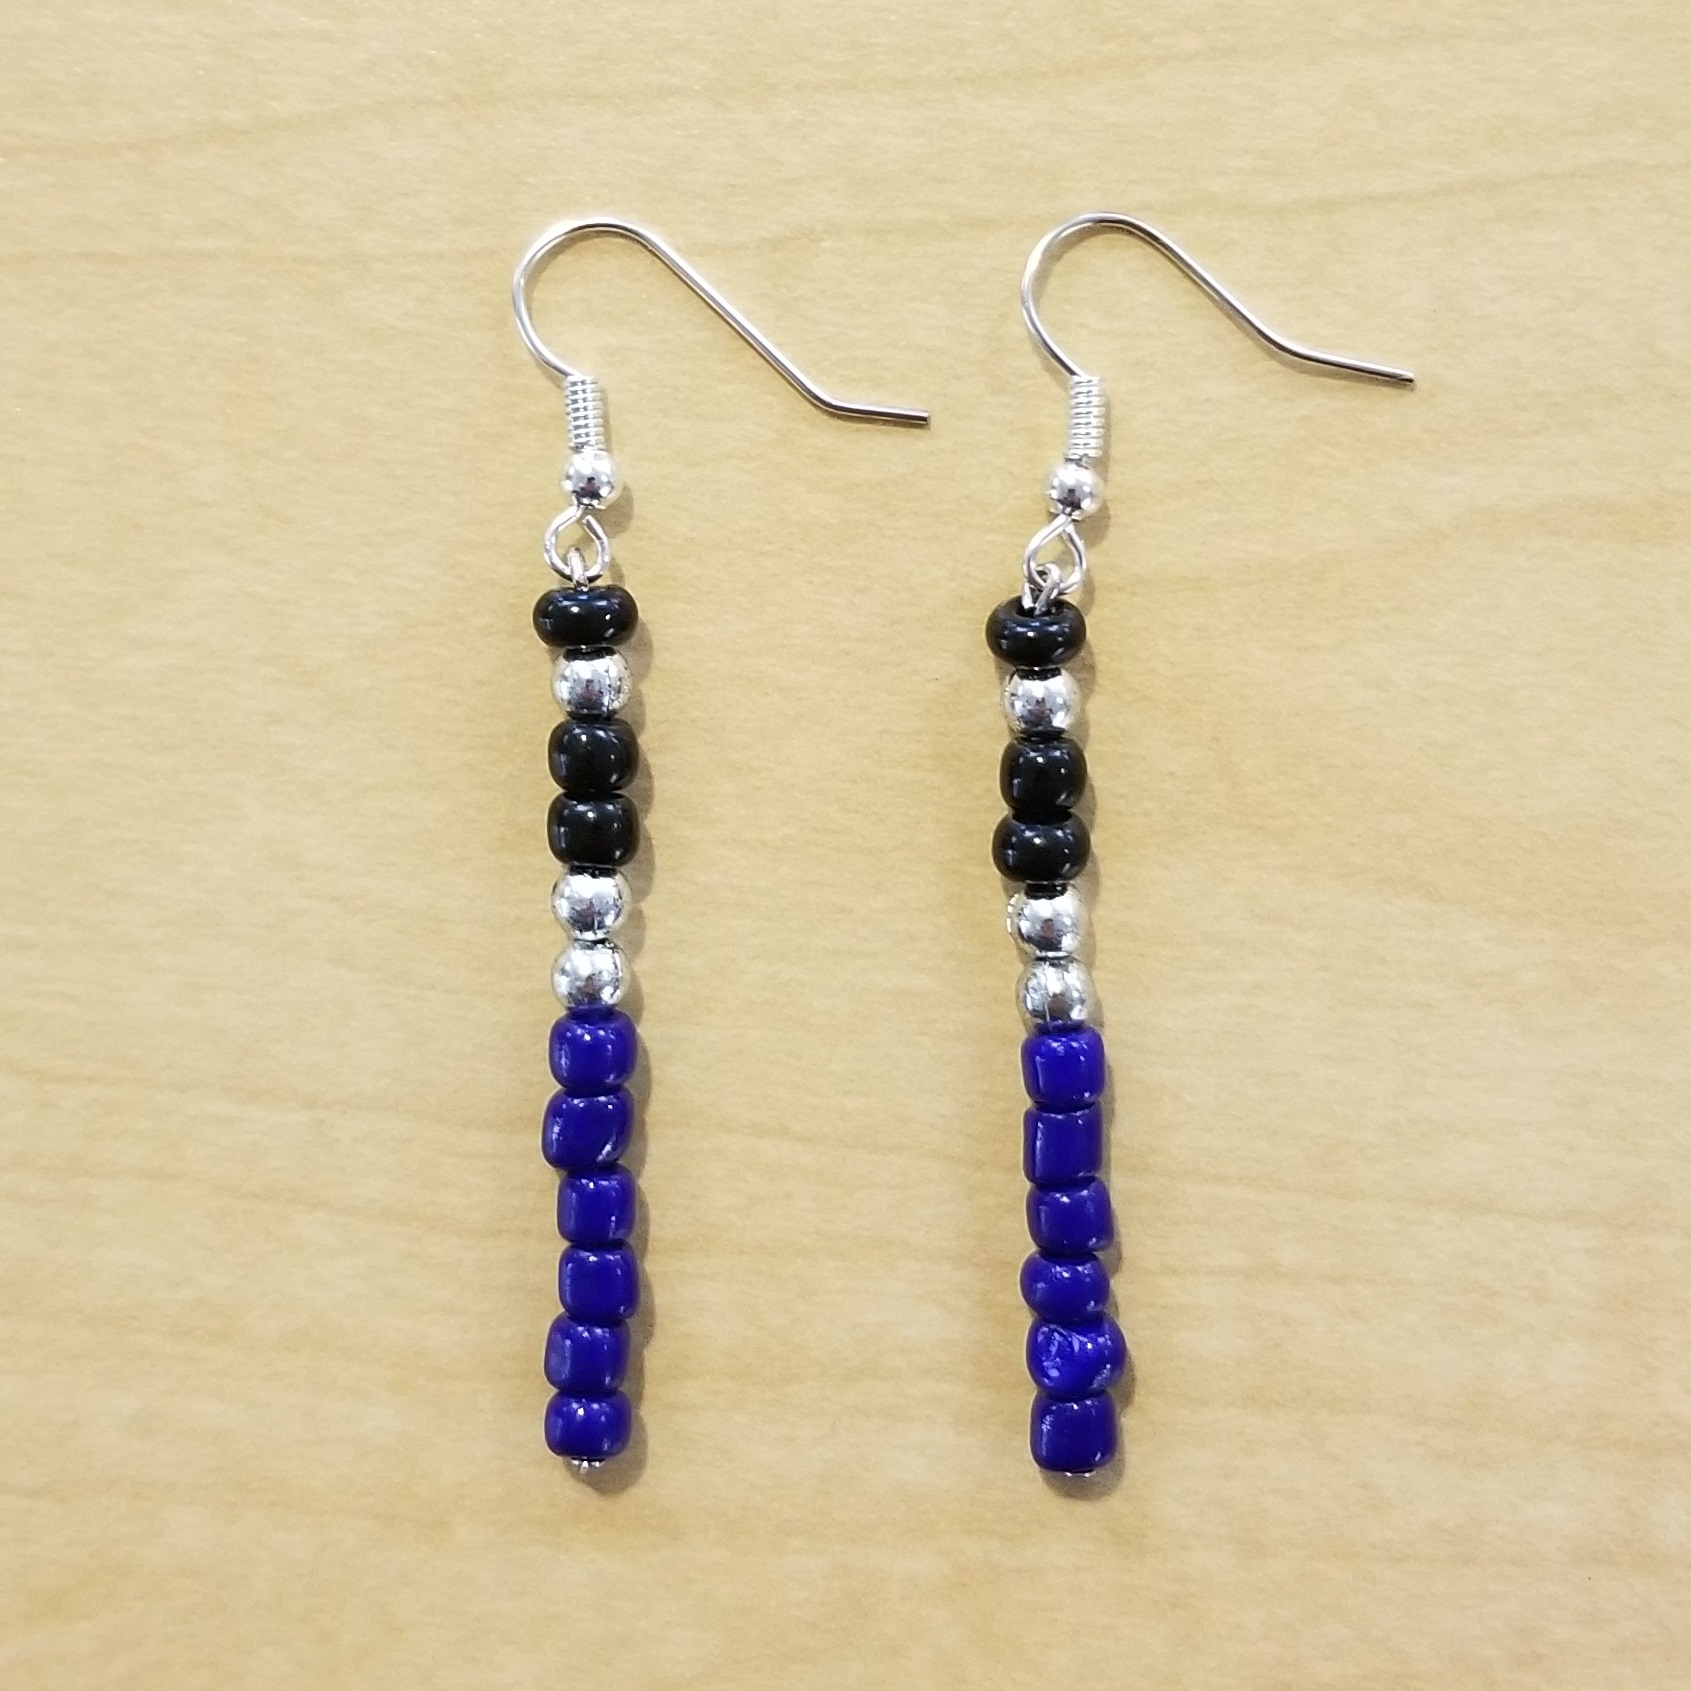 Two lightsaber earrings (blue, silver, and black beads are arranged vertically to look like a lightsaber)